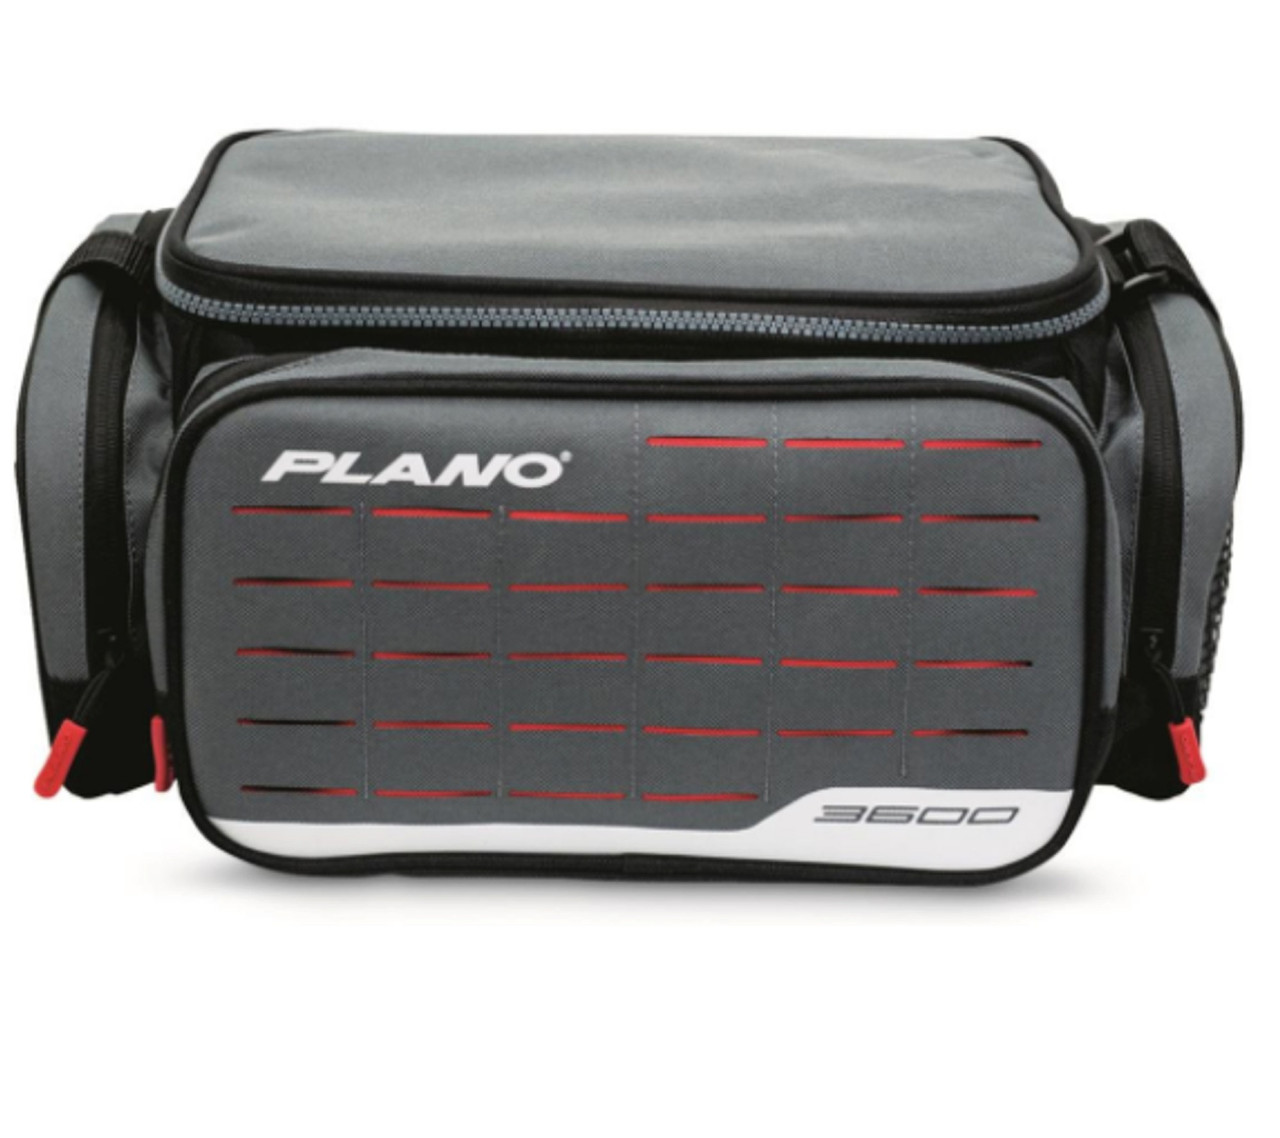 Plano Tackle Case, 3600, Weekend Series